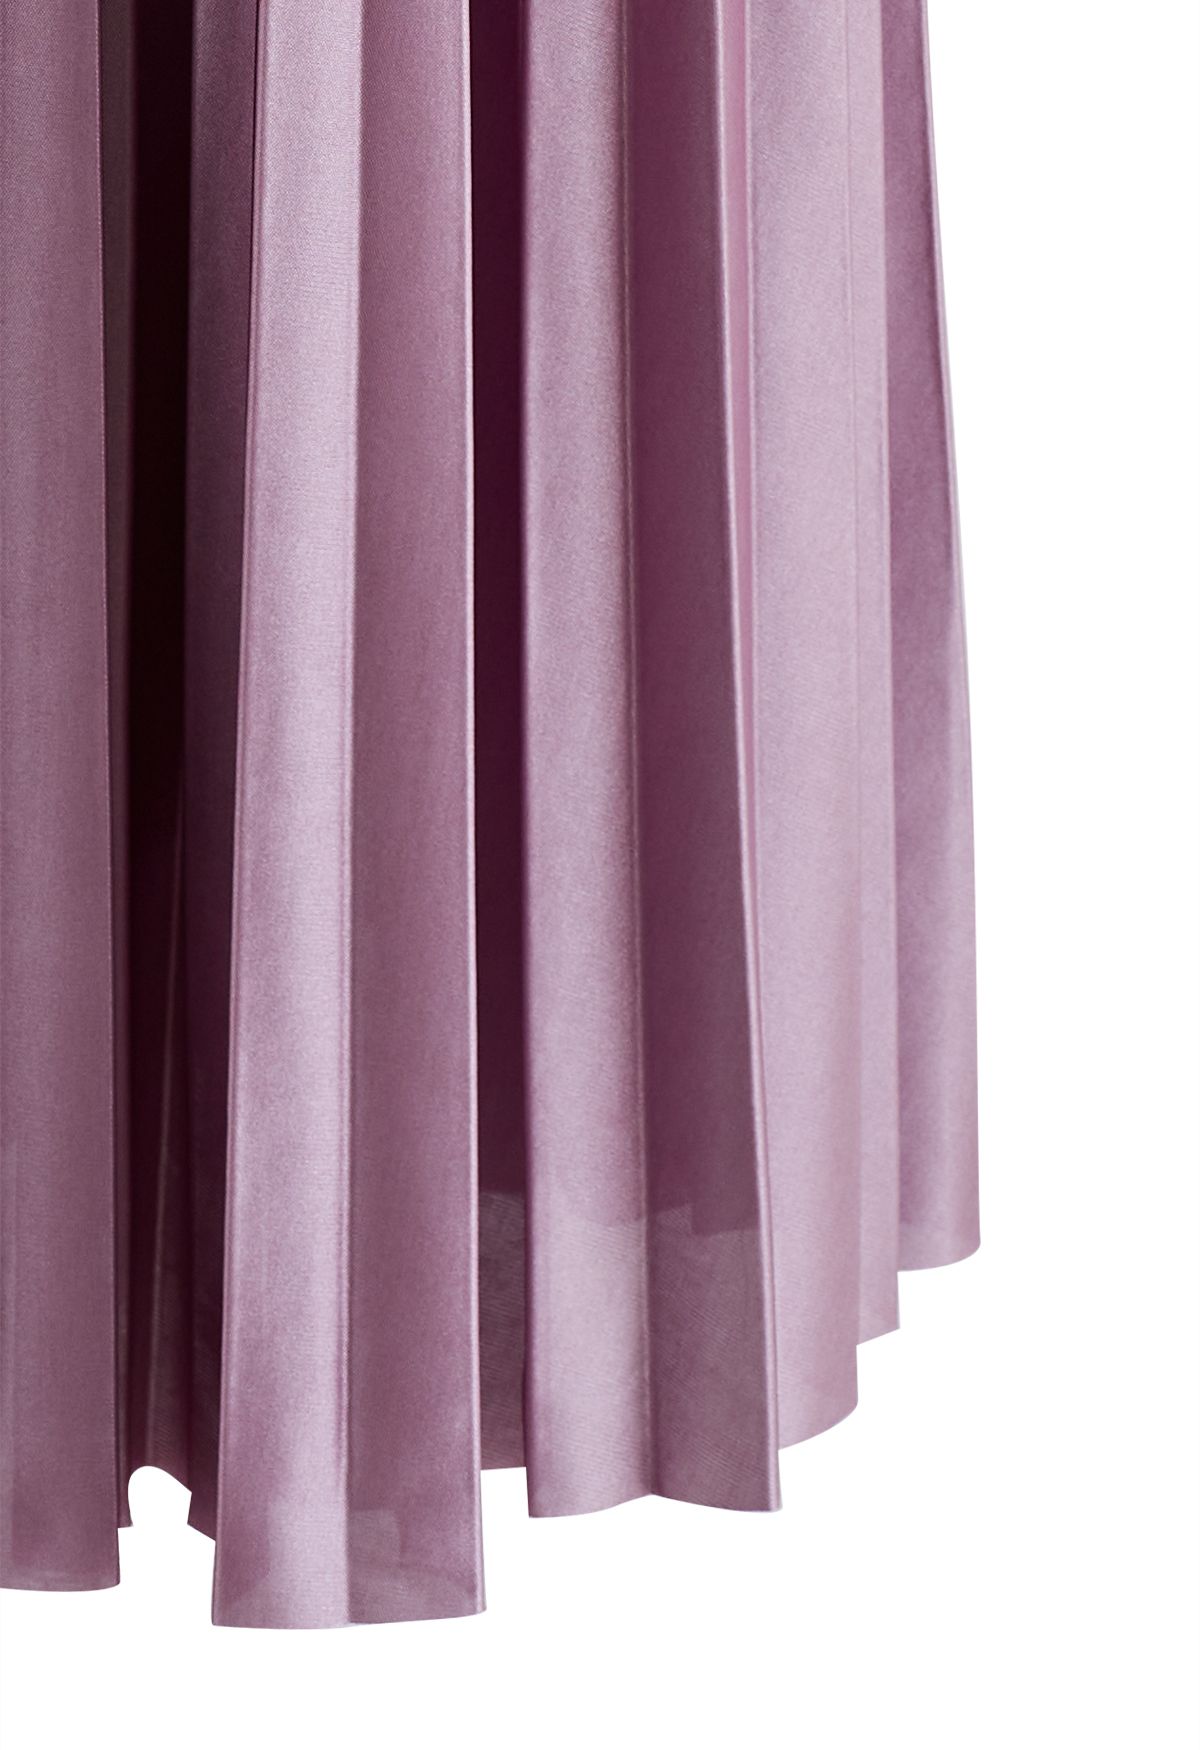 Glossy Pleated Maxi Skirt in Violet